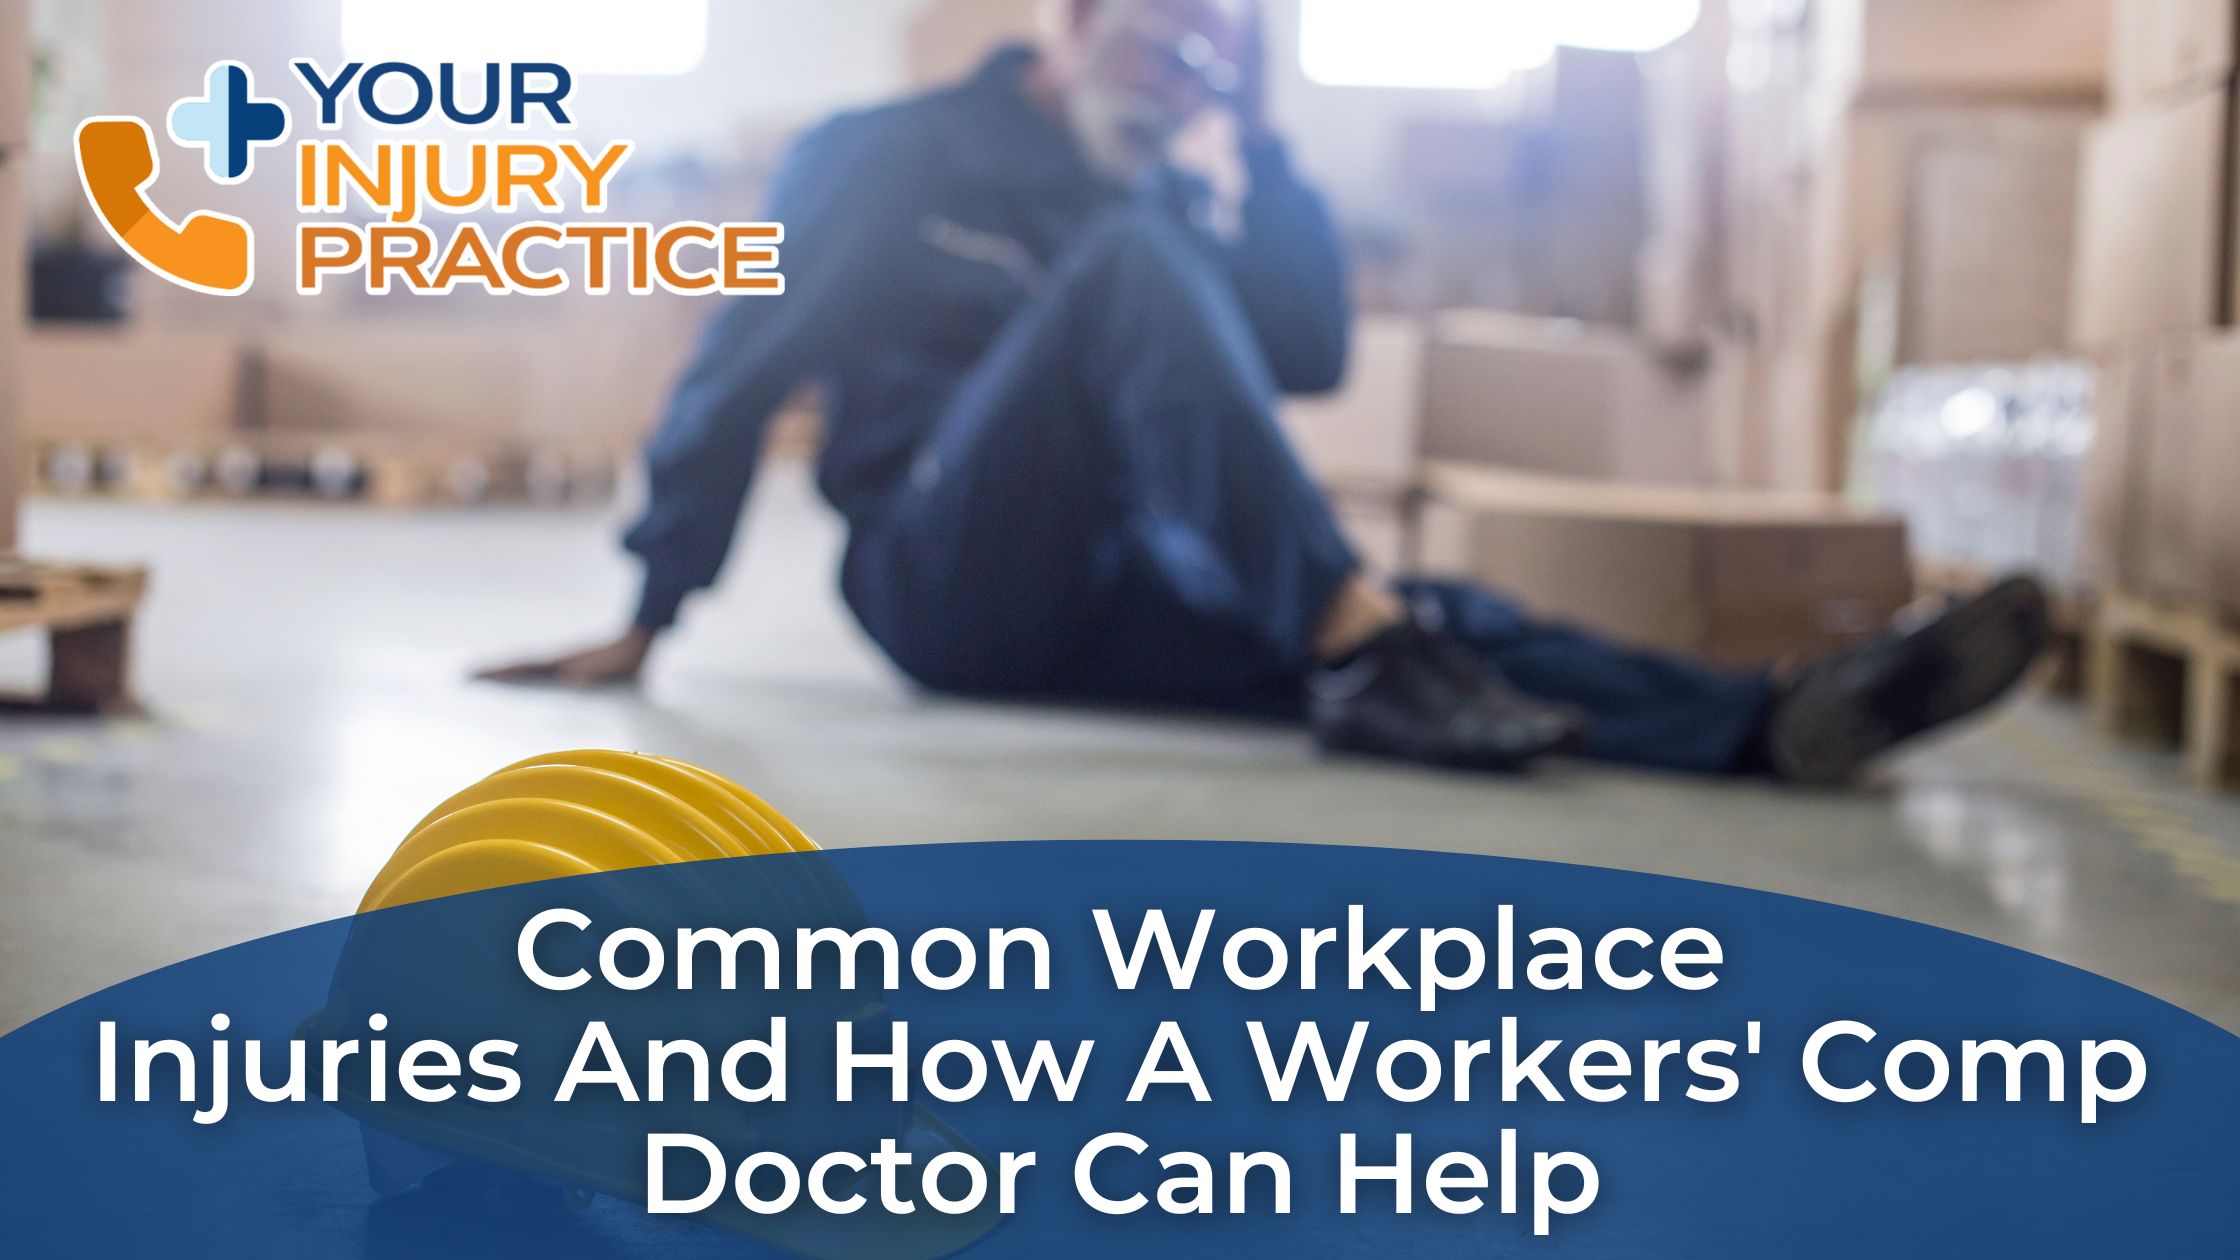 Common Workplace Injuries and How a Workers' Comp Doctor Can Help